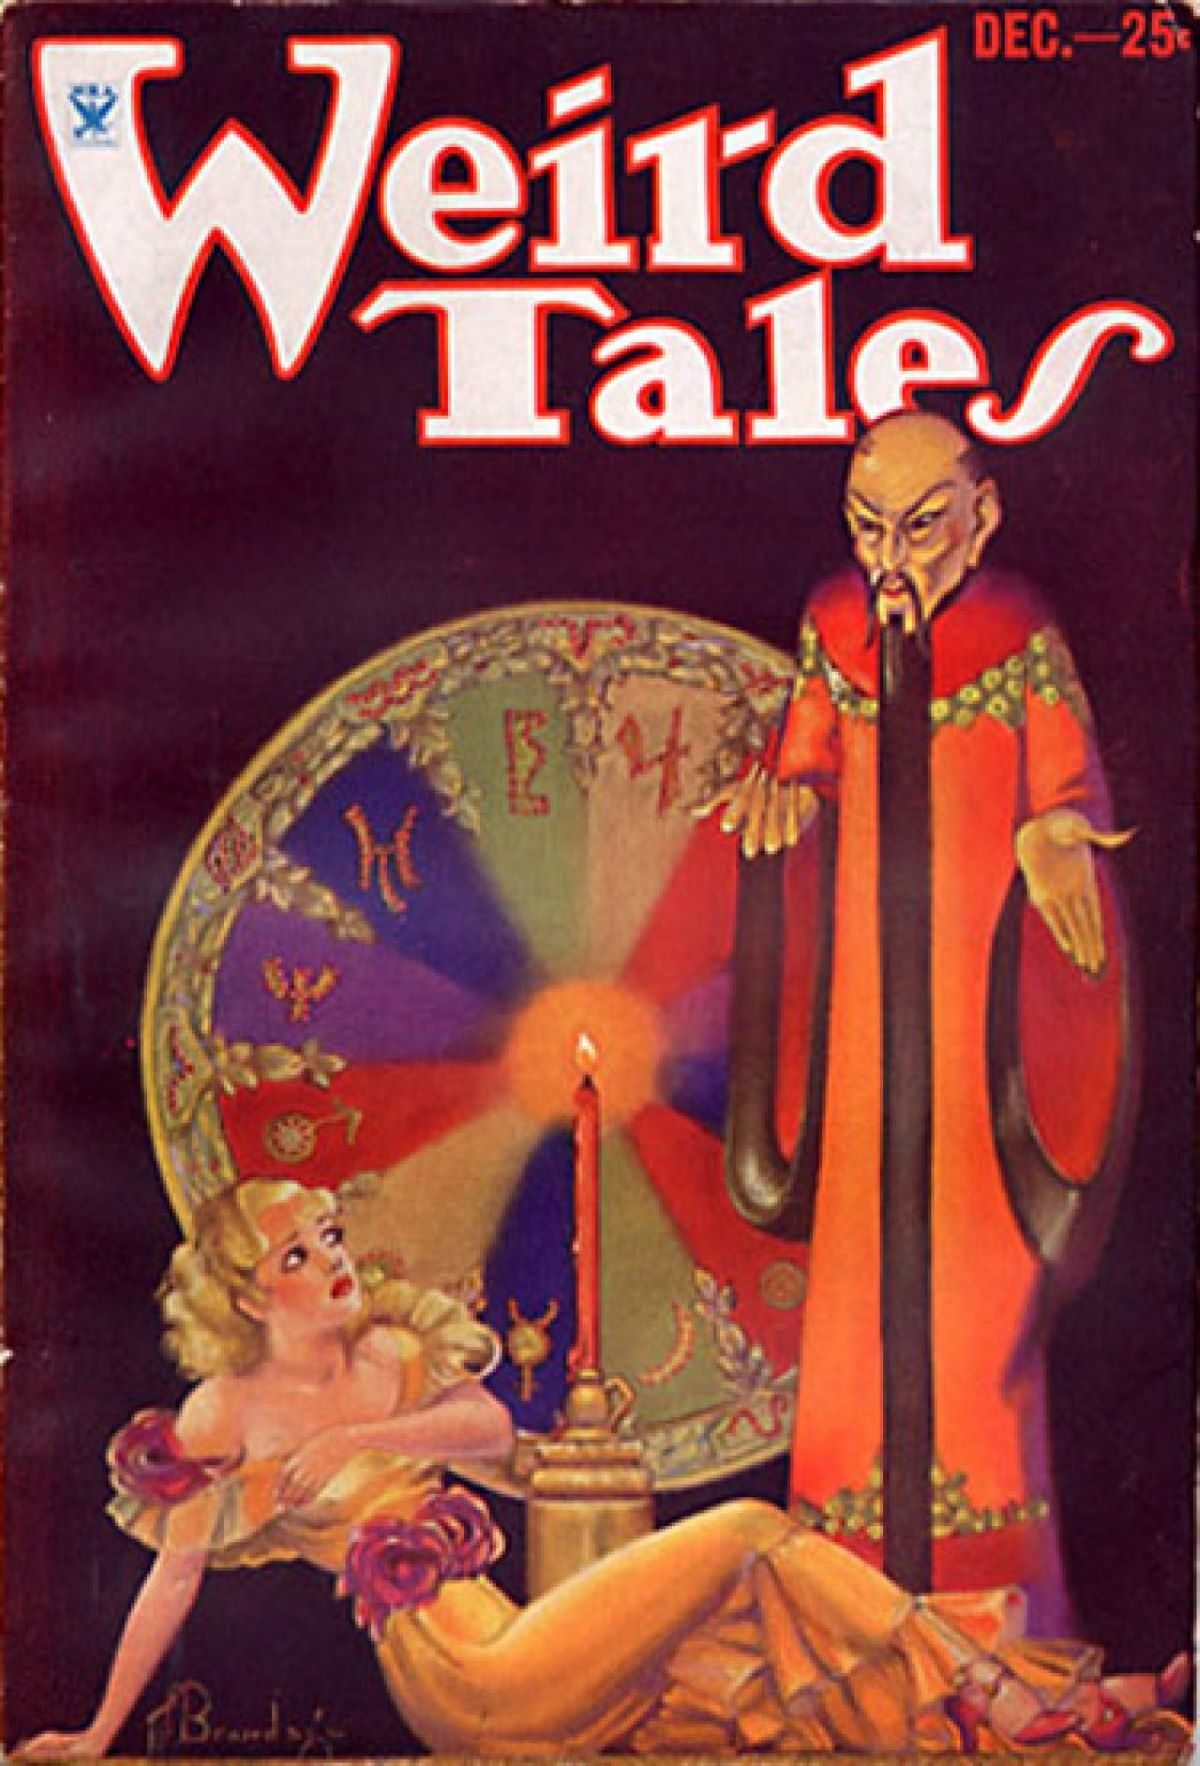 Weird Tales, artwork, covers horror magazine, writers, stories, occult, fiction, 1920s, 1930s, 1940s